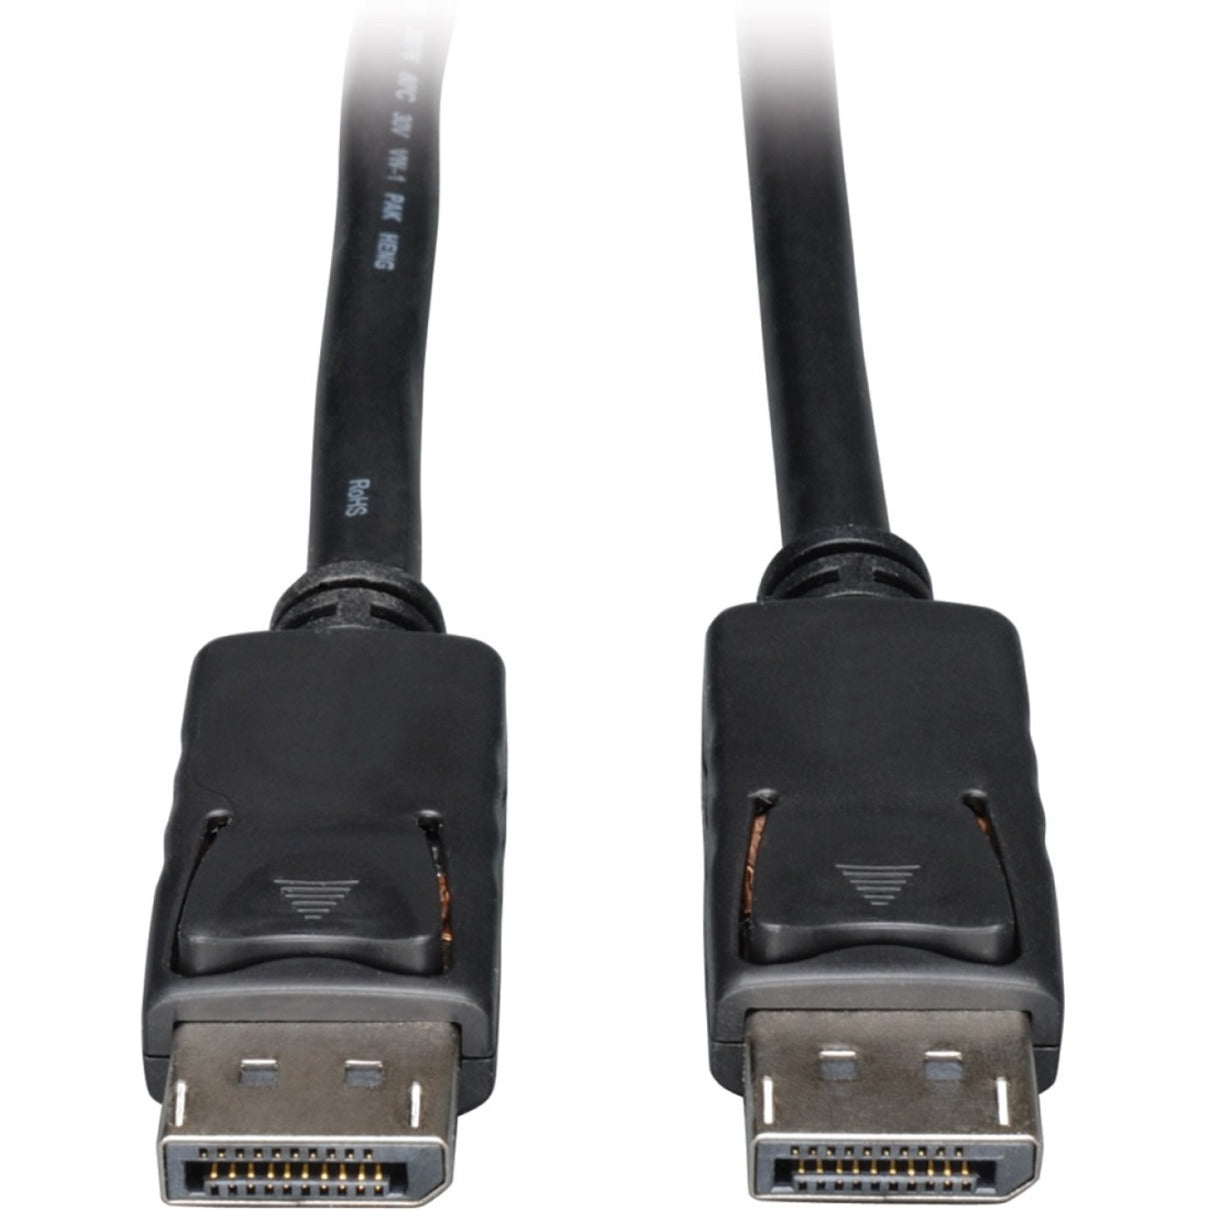 Tripp Lite P580-001 DisplayPort Cable with Latches (M/M), 1-ft, Copper Conductor, Black